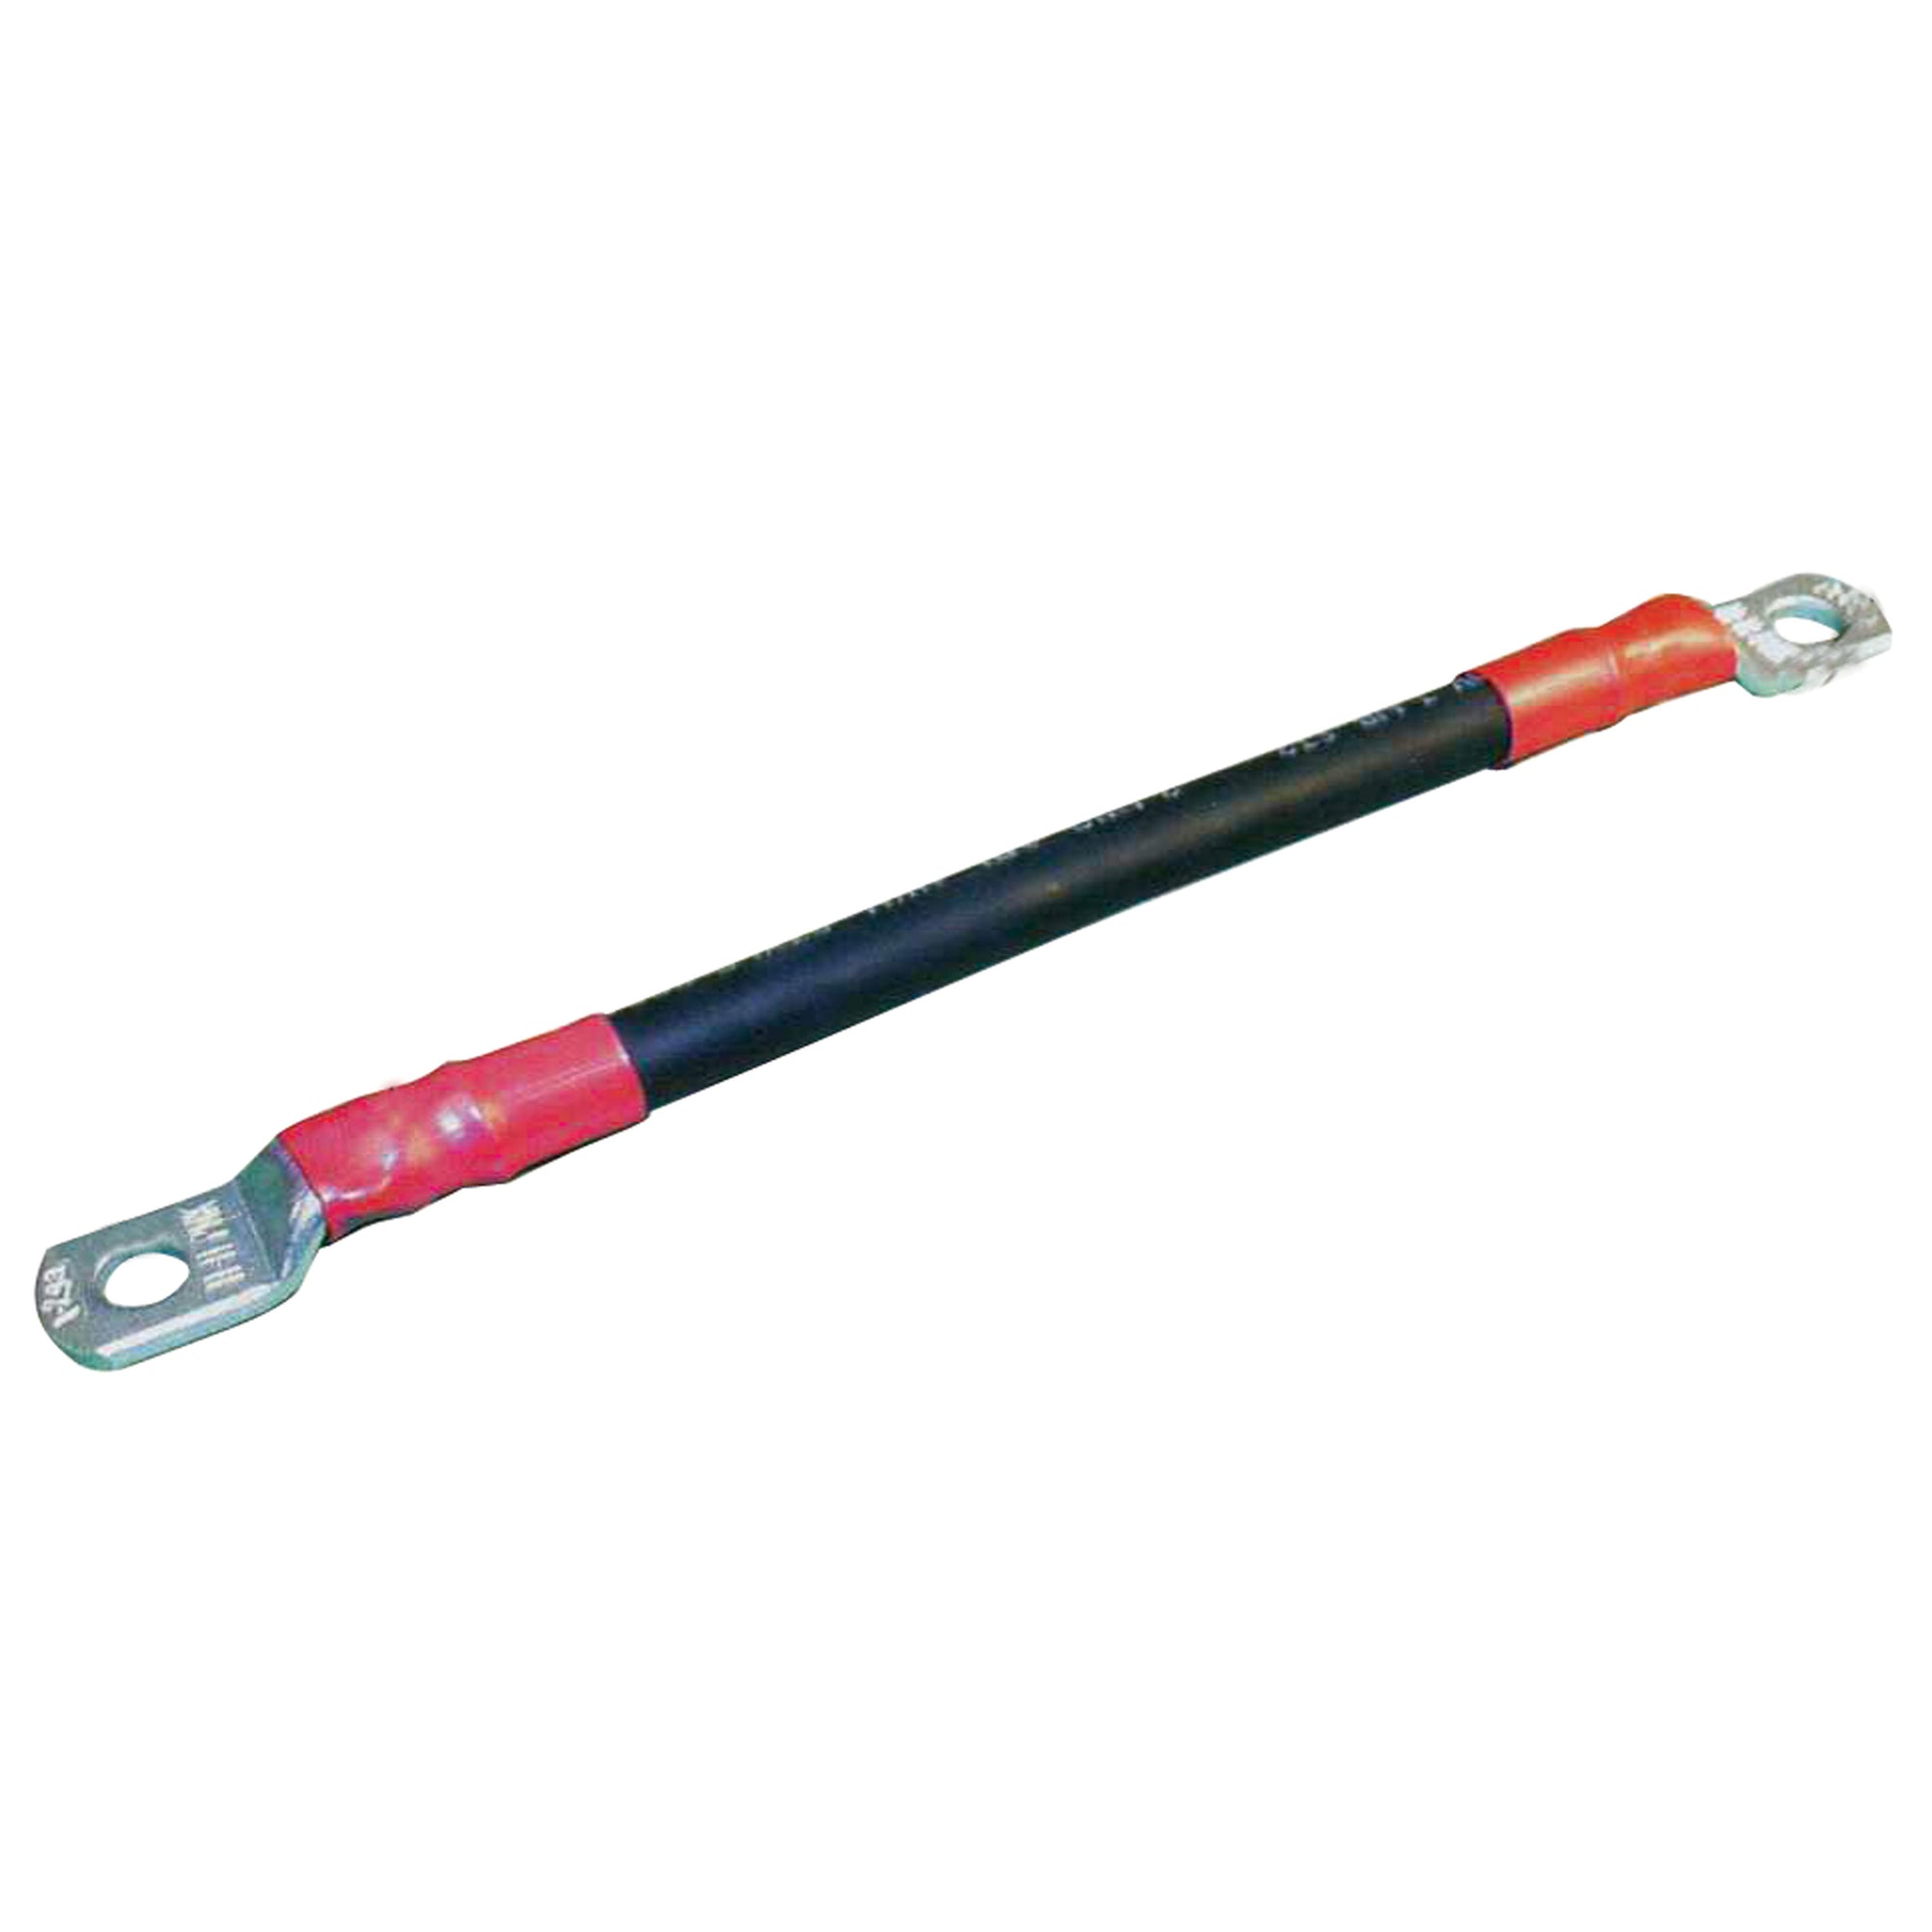 Quick Cable 205416 Inverter Hook Up Cable - 2 Gauge, Red